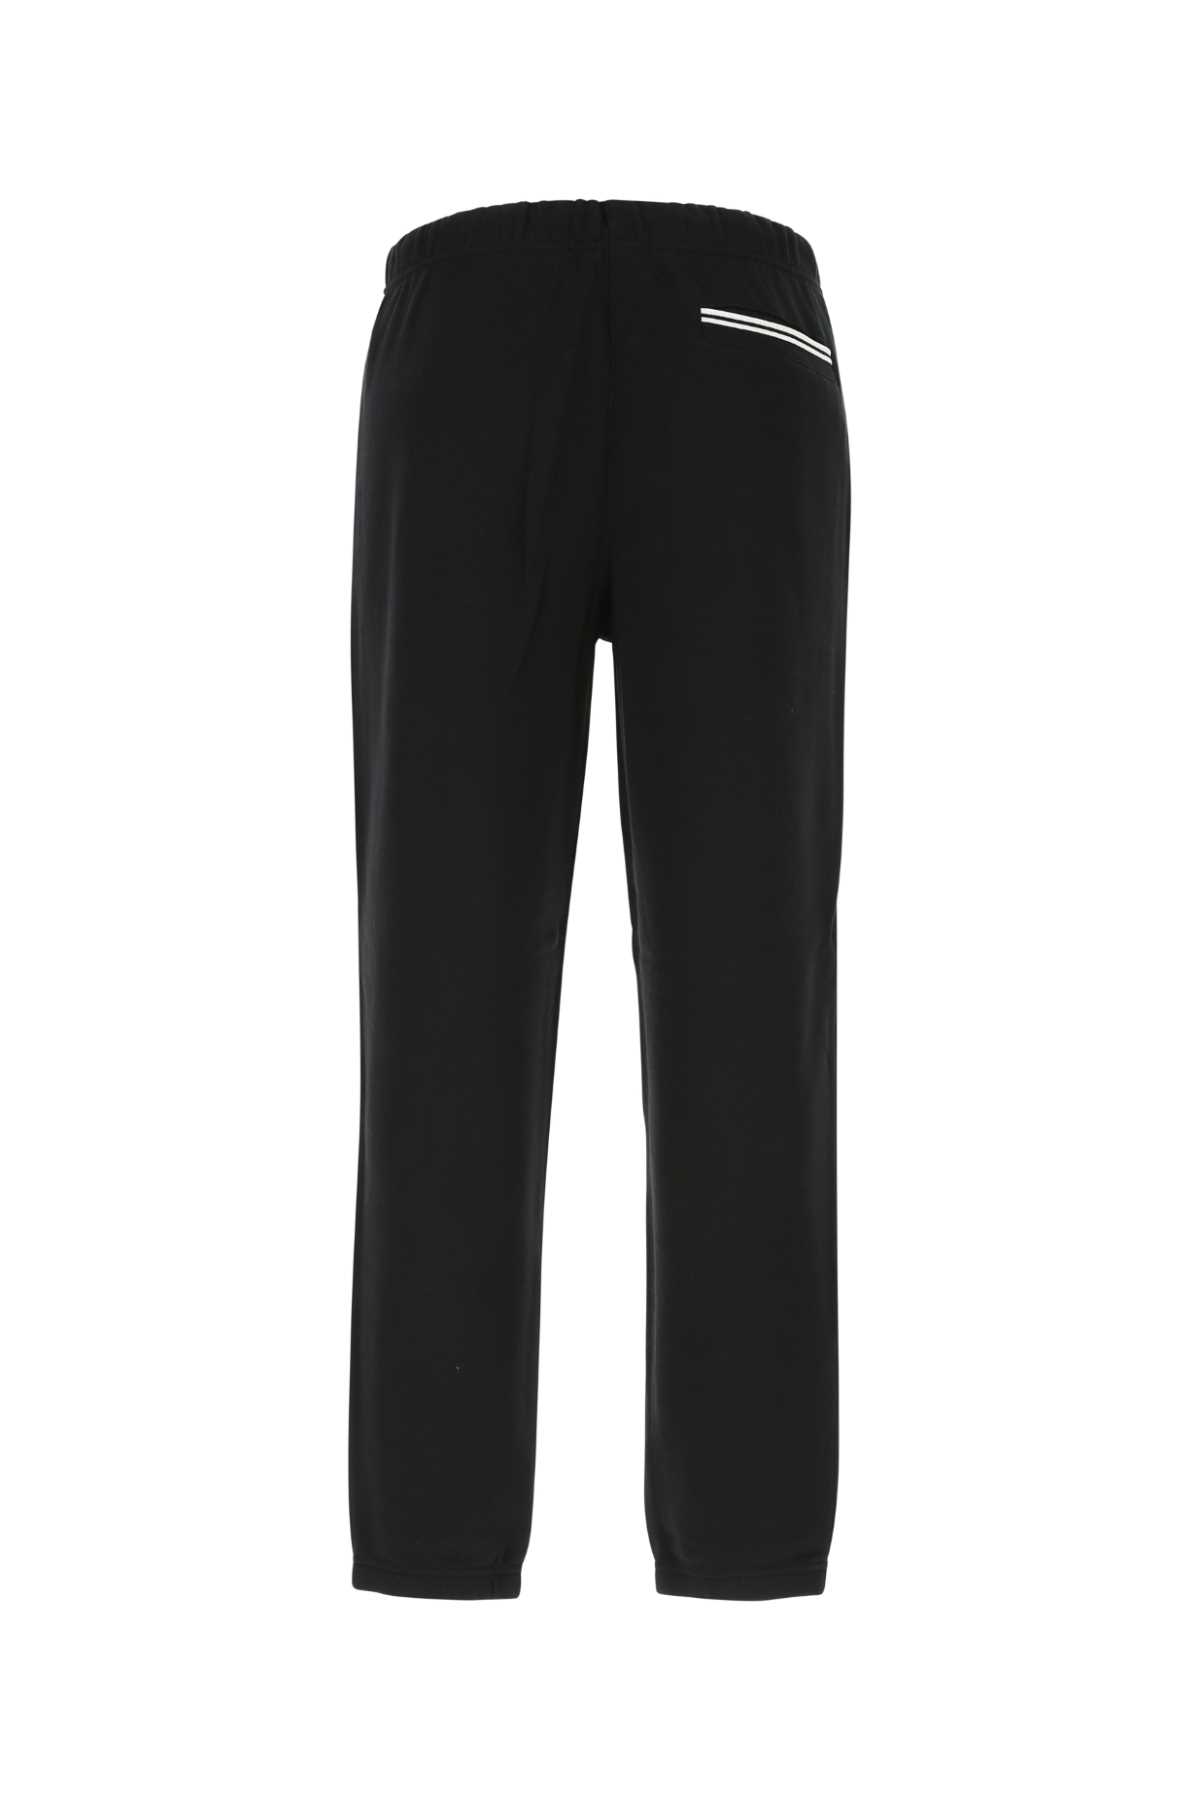 Fred Perry Pantalone In Blk